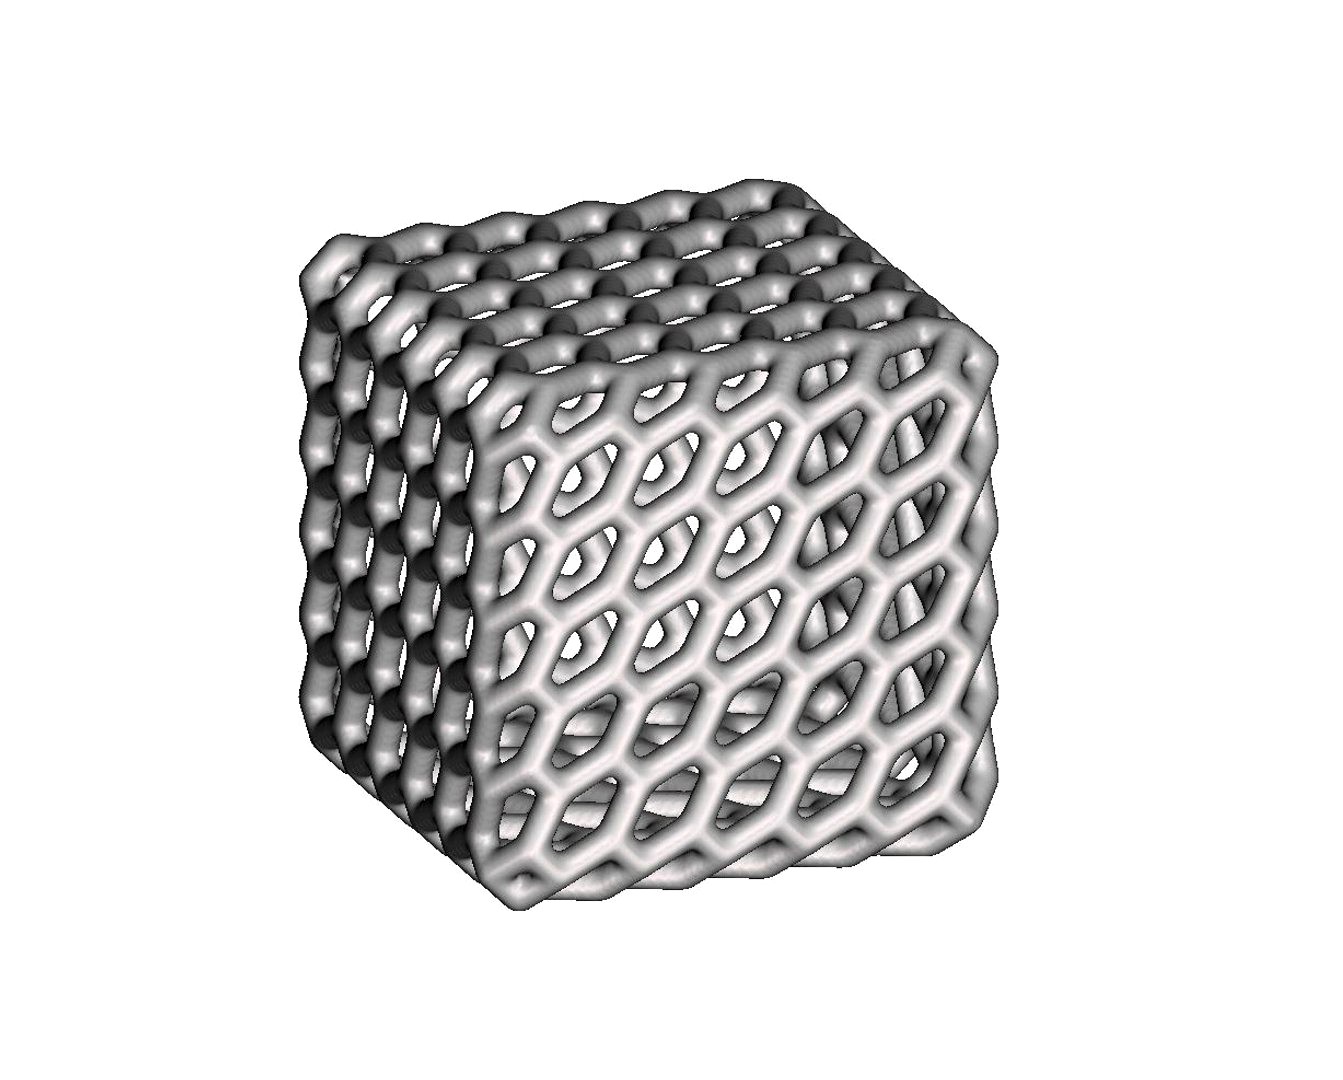 Patterned Cube